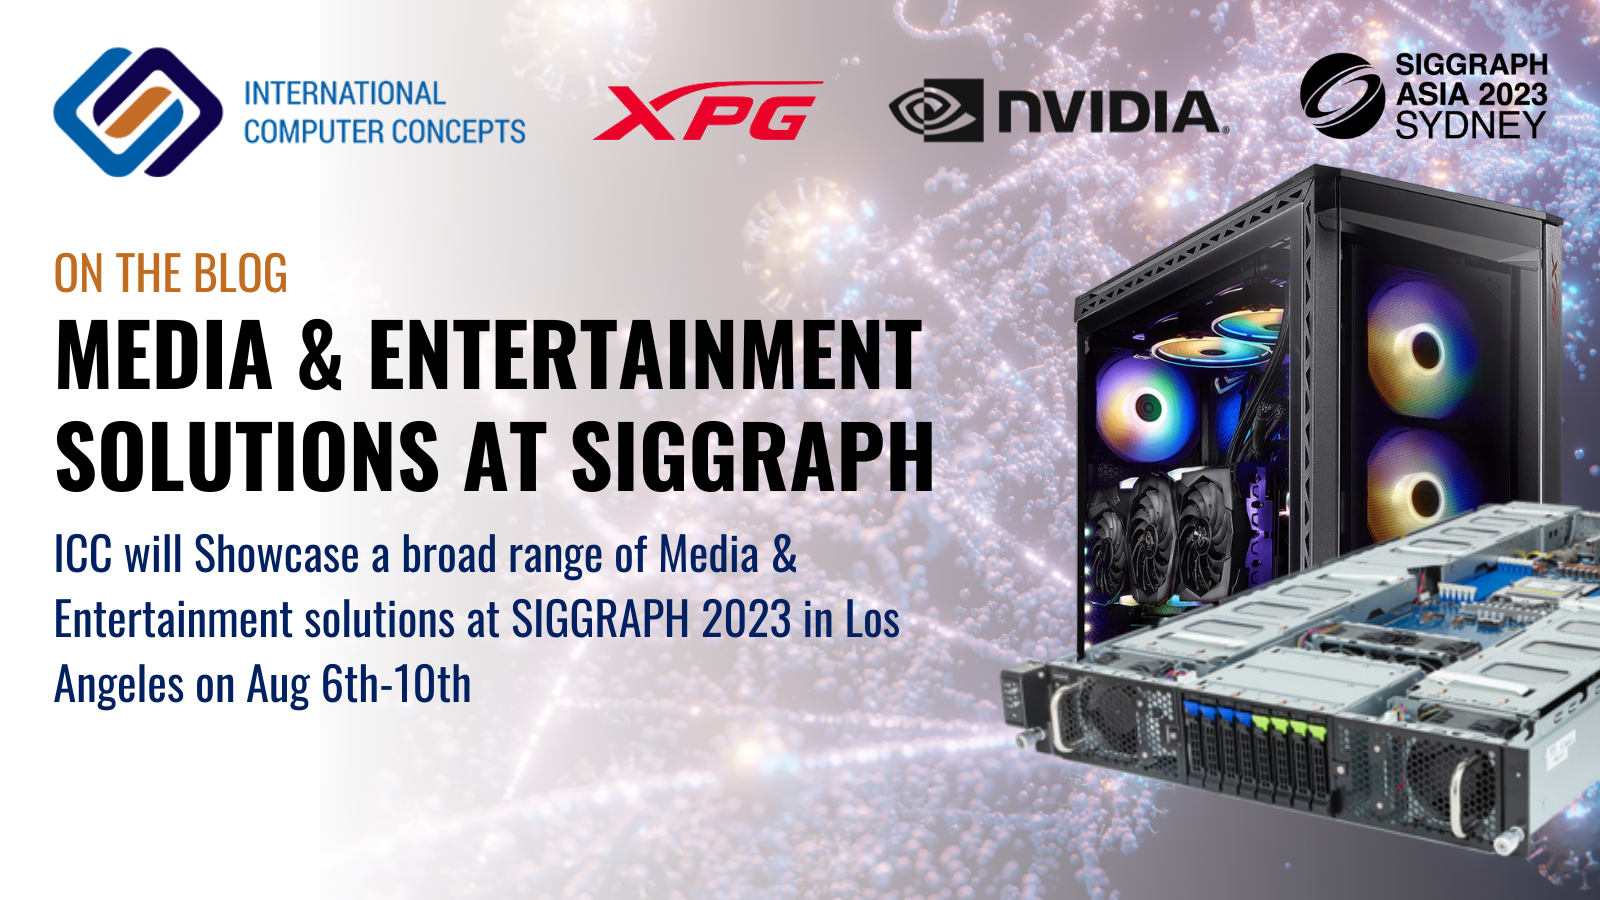 ICC Showcase NVIDIA Accelerated Media & Entertainment Solutions at SIGGRAPH 2023